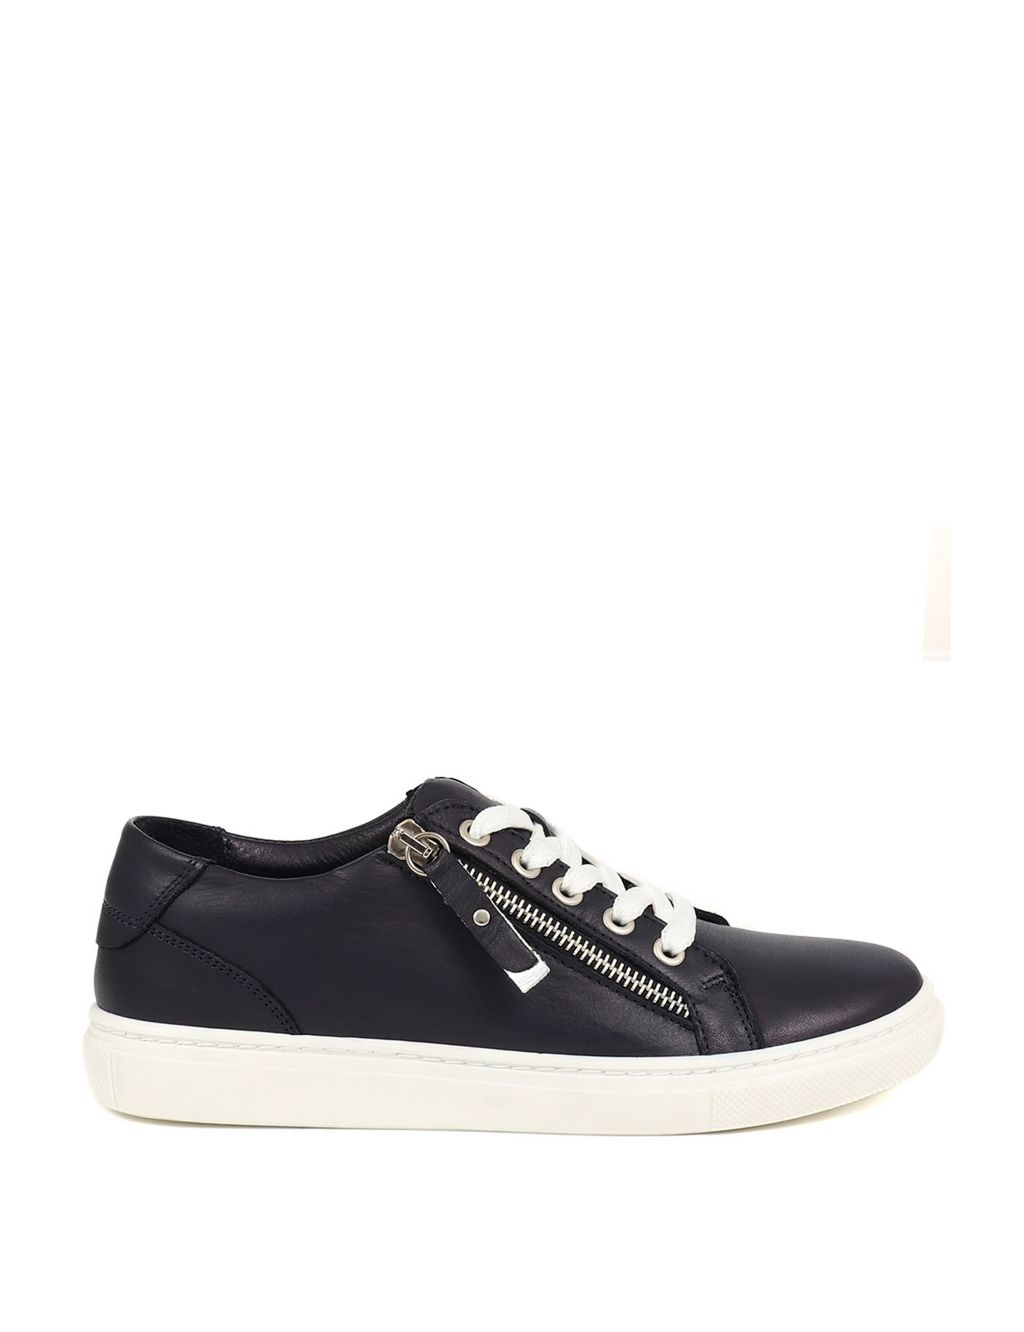 Leather Zip Up Trainers image 2